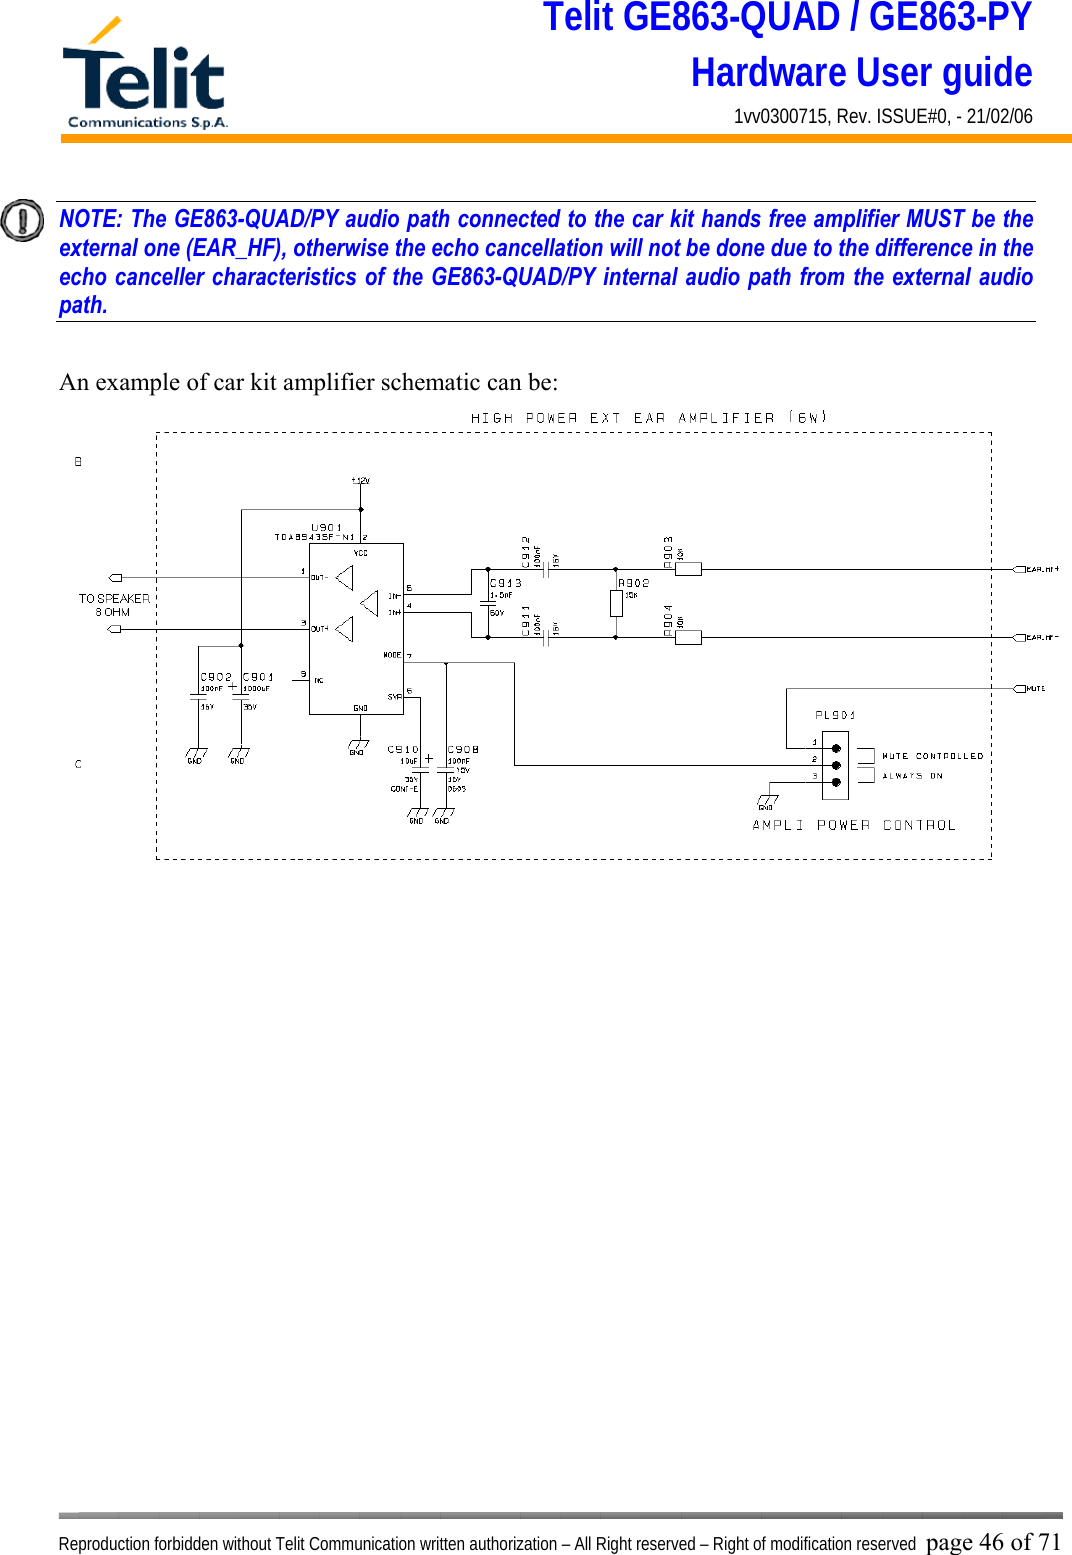 Telit GE863-QUAD / GE863-PY Hardware User guide 1vv0300715, Rev. ISSUE#0, - 21/02/06    Reproduction forbidden without Telit Communication written authorization – All Right reserved – Right of modification reserved page 46 of 71 NOTE: The GE863-QUAD/PY audio path connected to the car kit hands free amplifier MUST be the external one (EAR_HF), otherwise the echo cancellation will not be done due to the difference in the echo canceller characteristics of the GE863-QUAD/PY internal audio path from the external audio path.    An example of car kit amplifier schematic can be:   